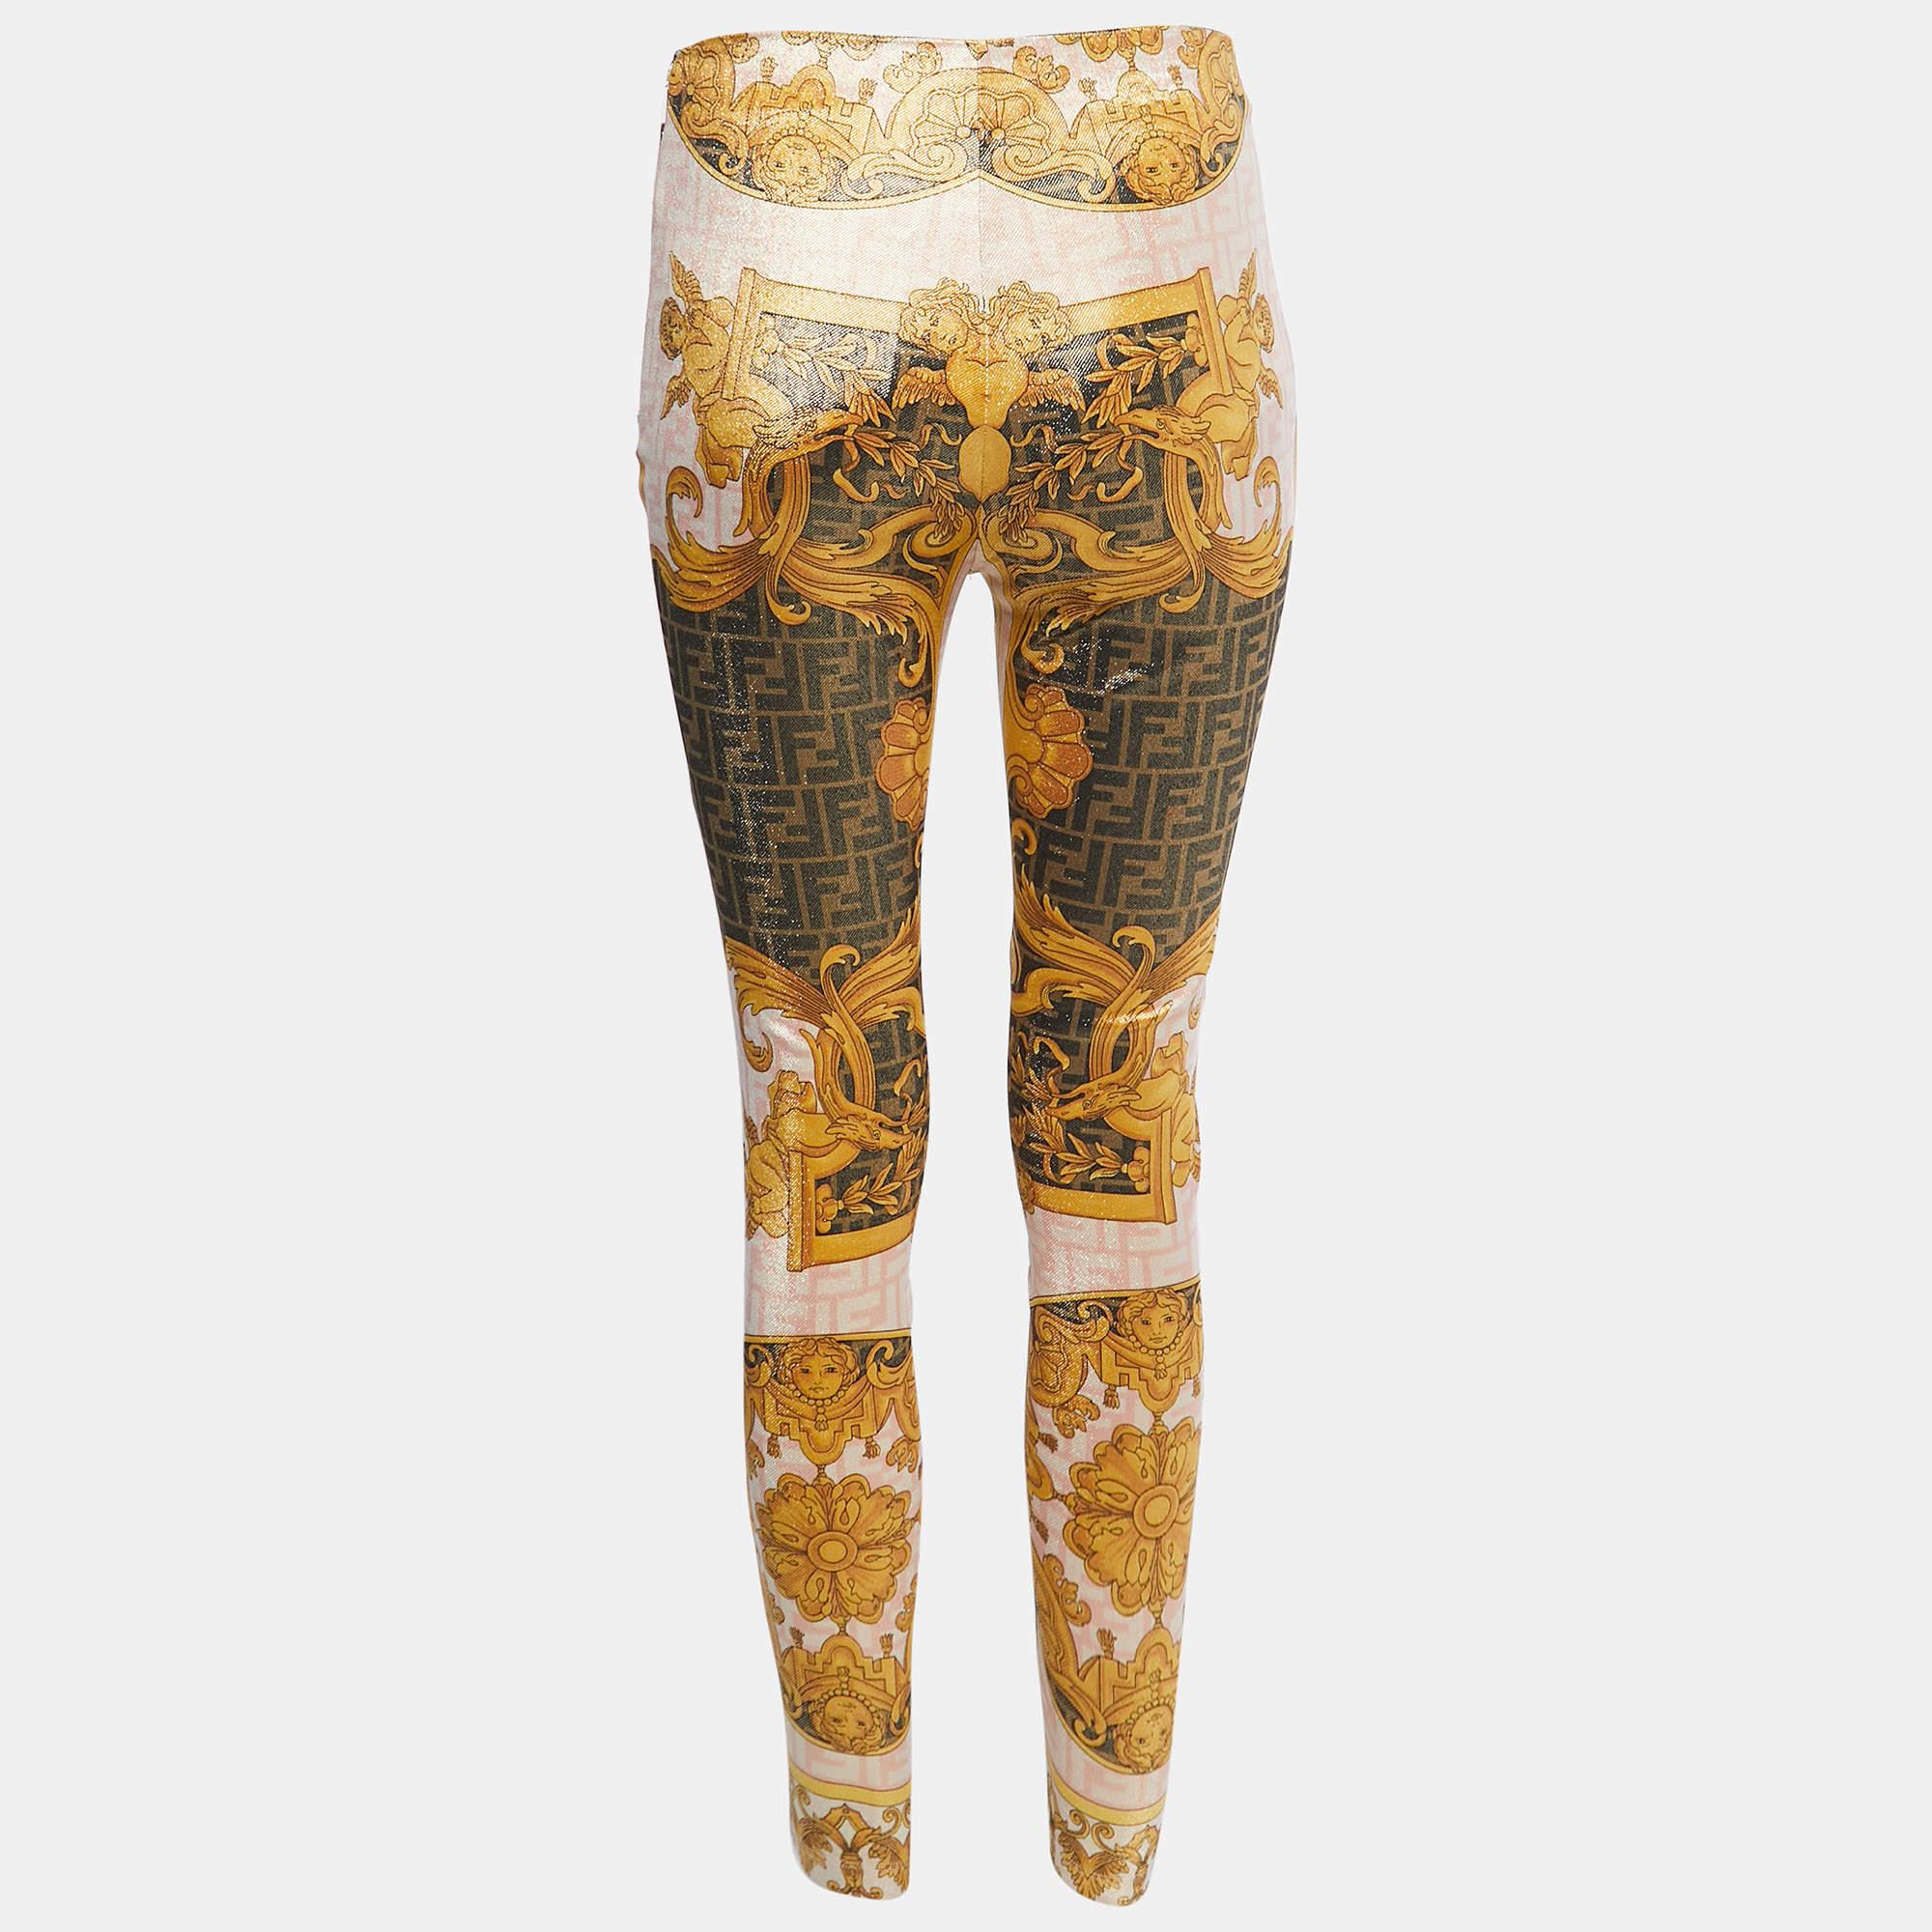 The Fendi x Versace leggings combine the best of both luxury brands, boasting a striking yellow hue and intricate patterns. Crafted from high-quality lurex knit, these leggings offer a comfortable and stylish fit, perfect for making a bold fashion